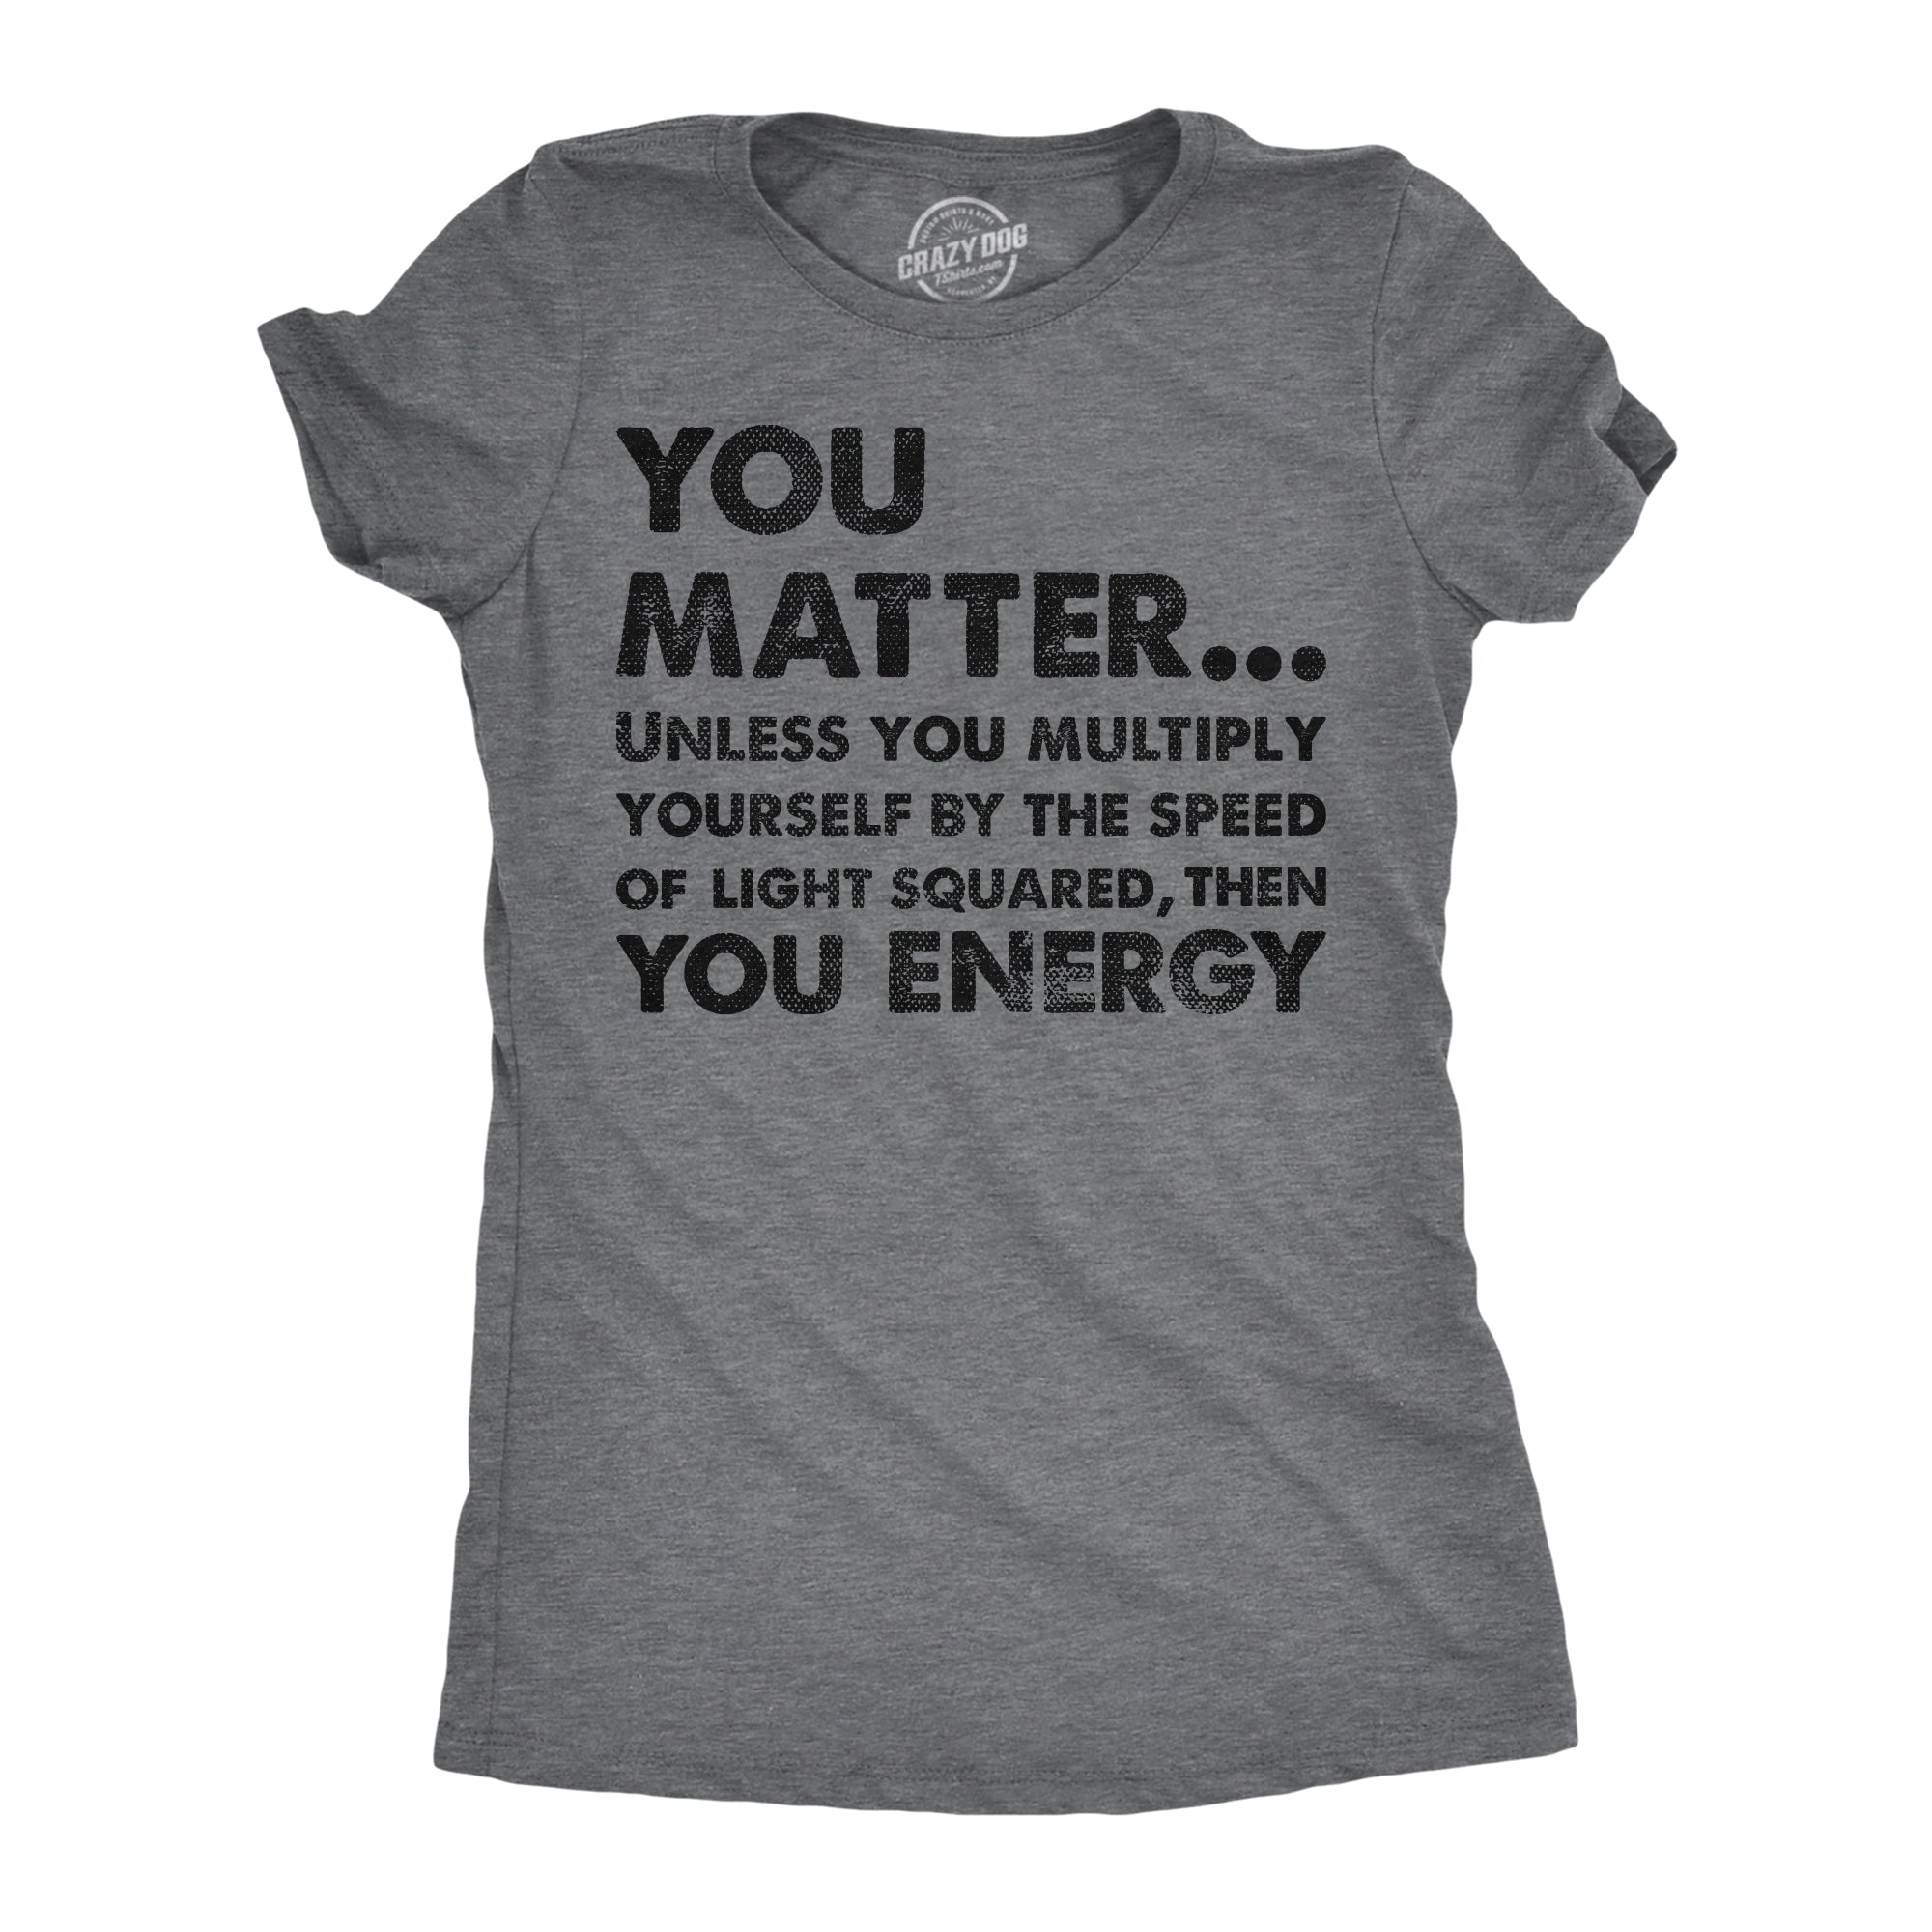 Funny Dark Heather Grey - You Matter You Energy You Matter Unless You Multiply Yourself By The Speed Of Light Squared Then You Energy Womens T Shirt Nerdy Nerdy science sarcastic Tee